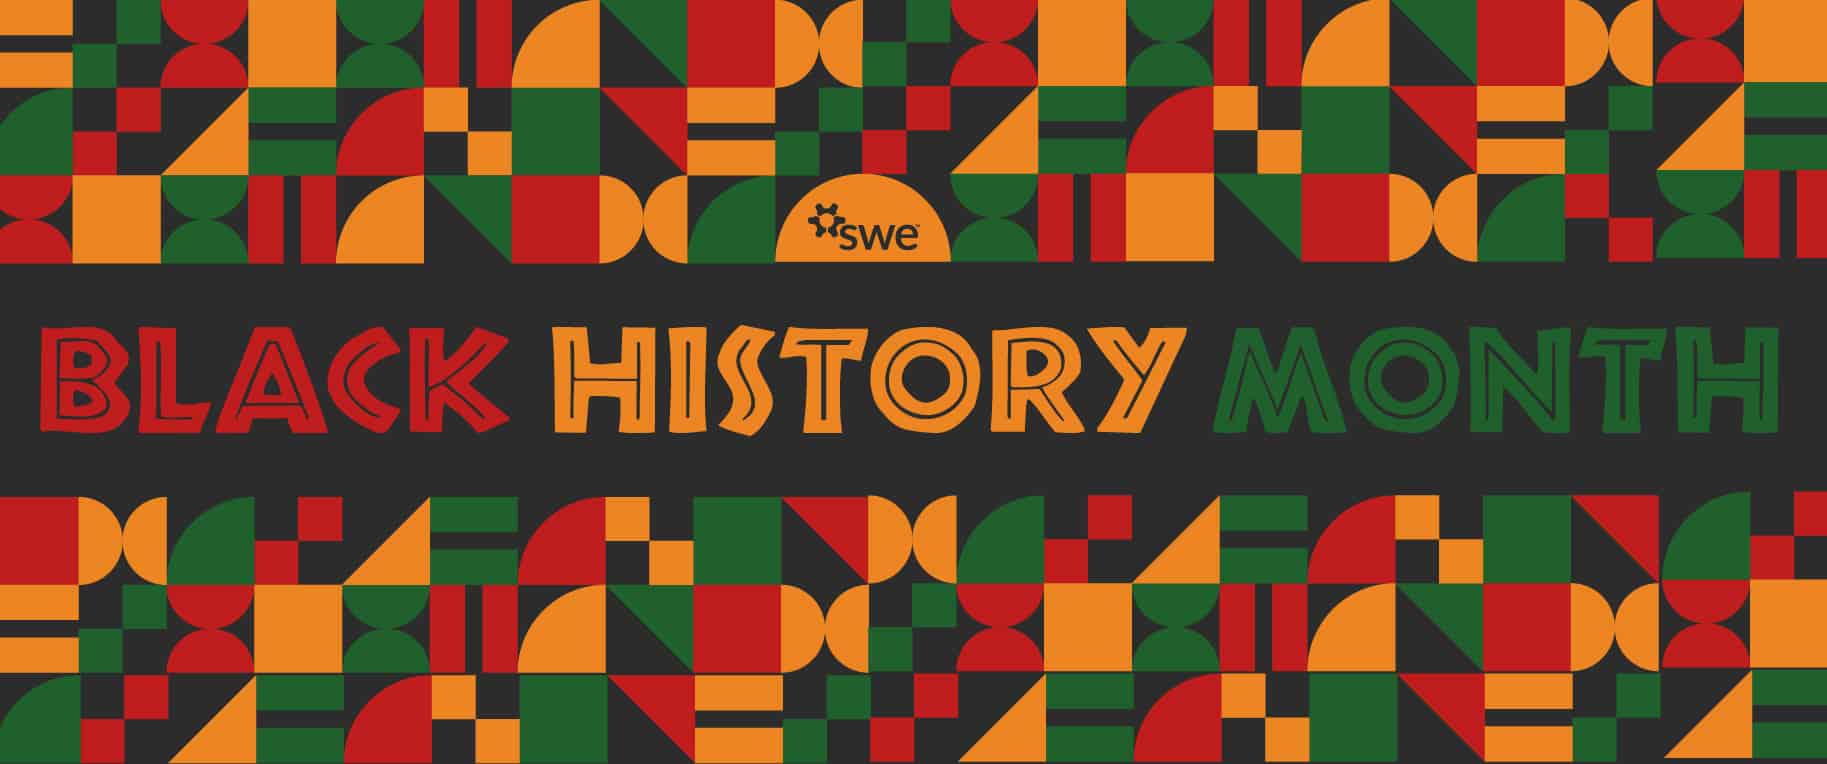 The History of Black History Month - black history month